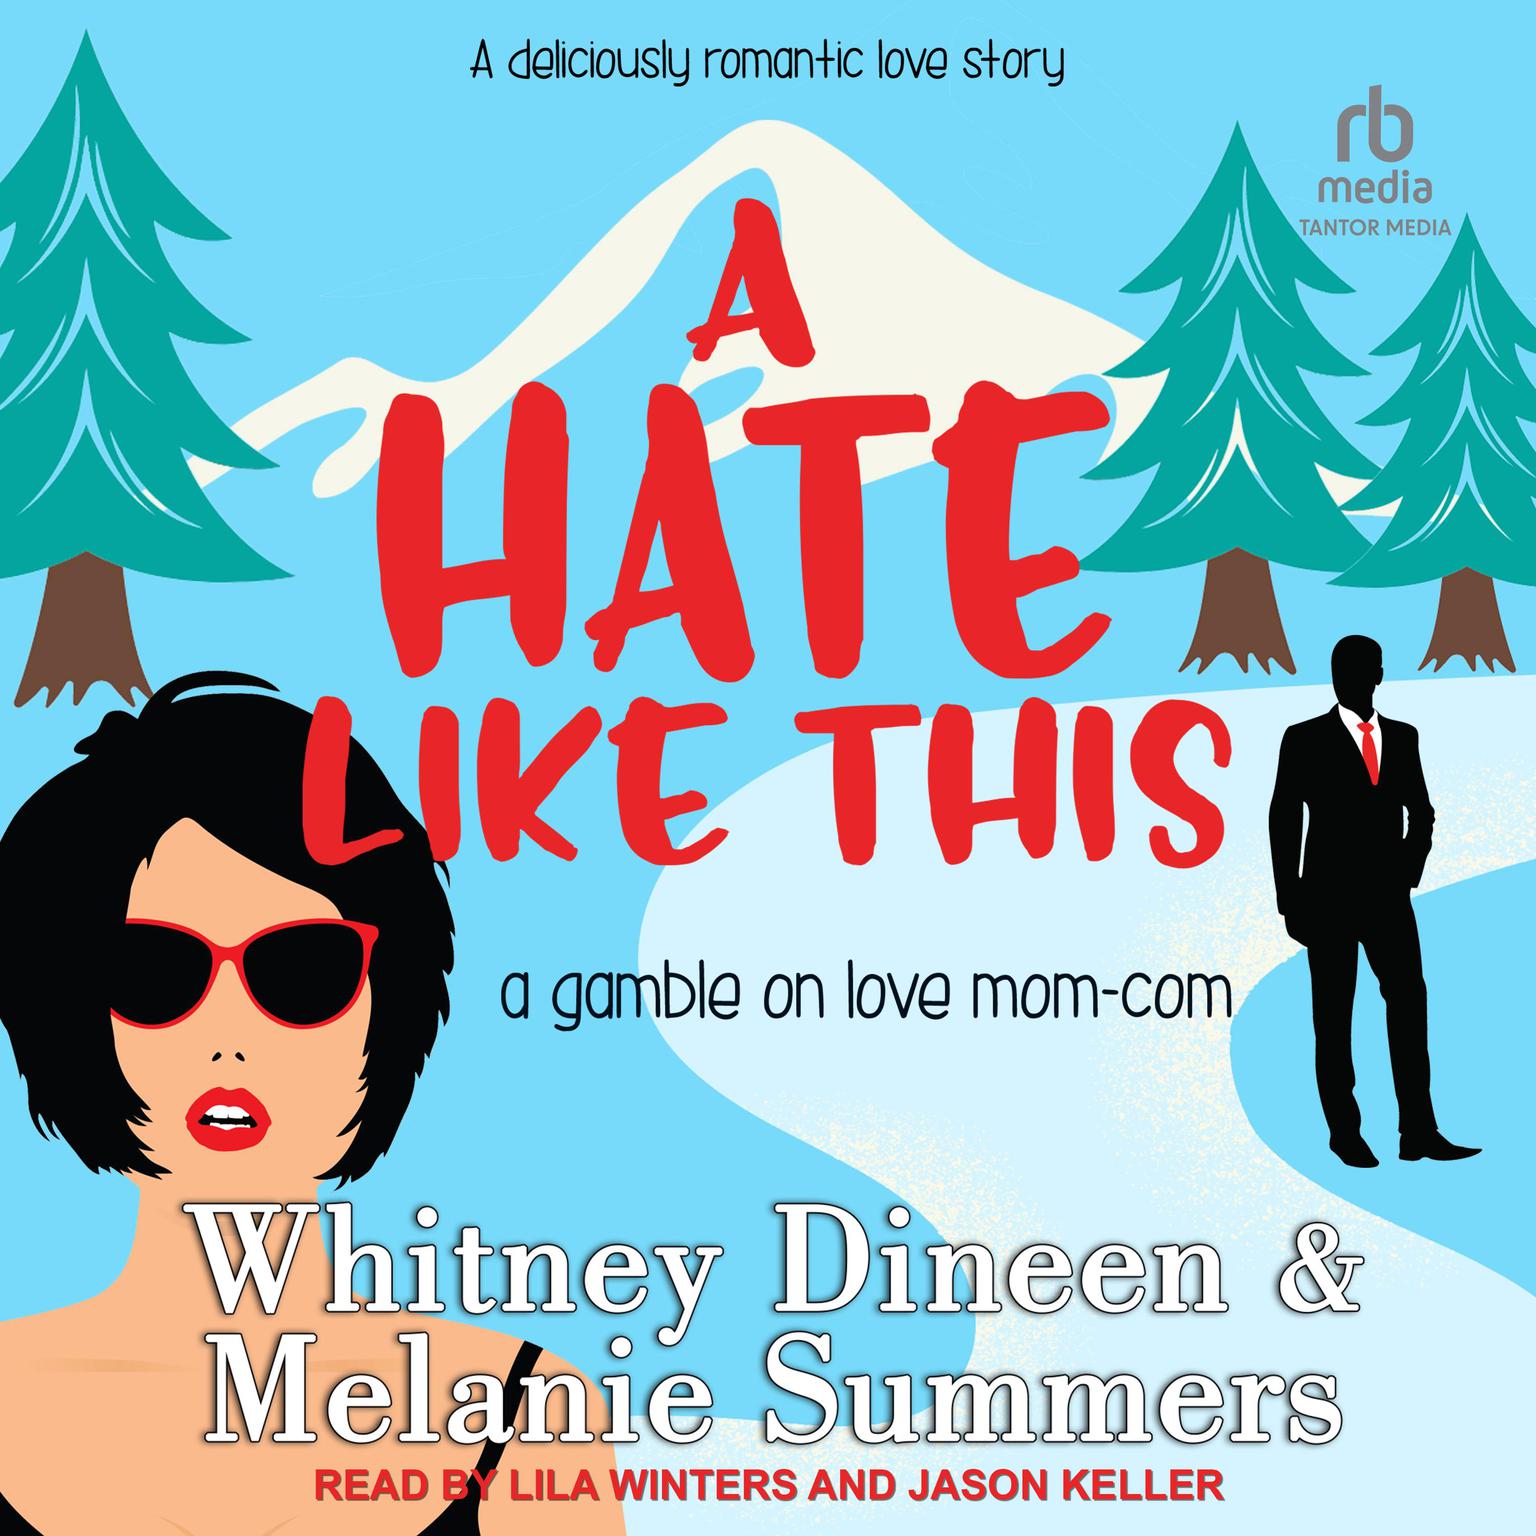 A Hate Like This Audiobook, by Melanie Summers